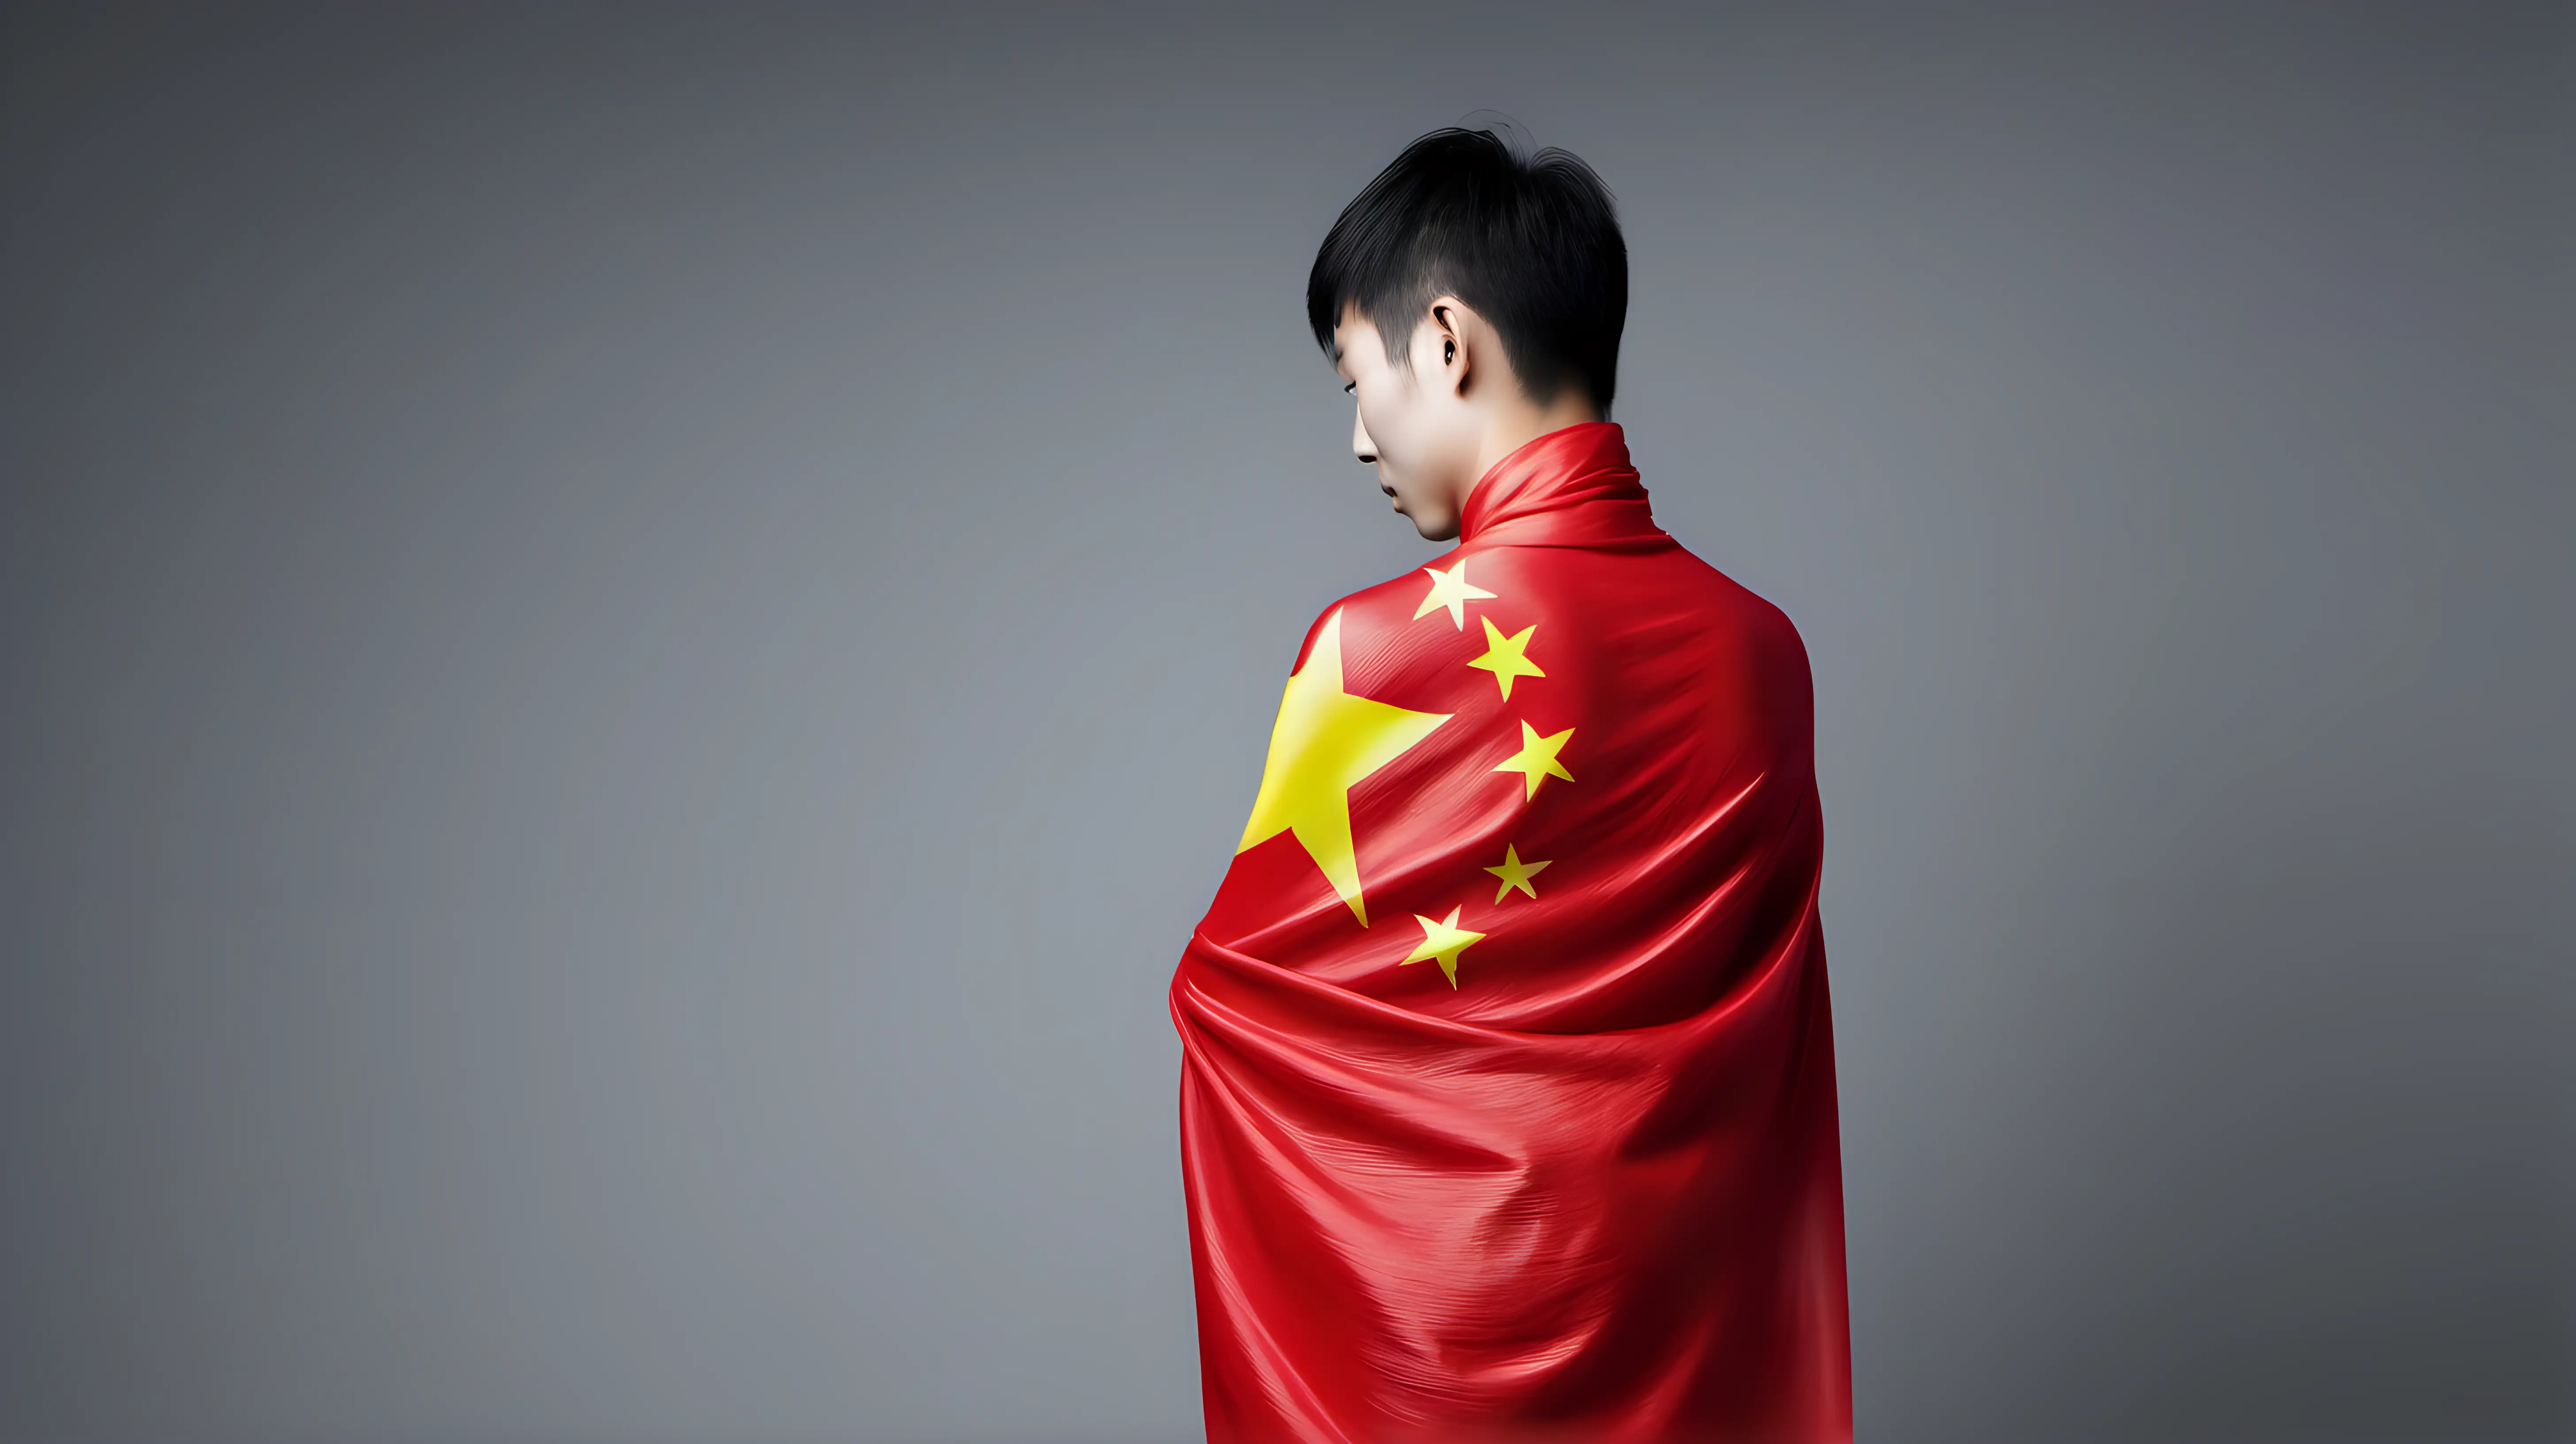 Showcase a person wrapping themselves in the Chinese flag, expressing a strong sense of patriotism and connection to the motherland.